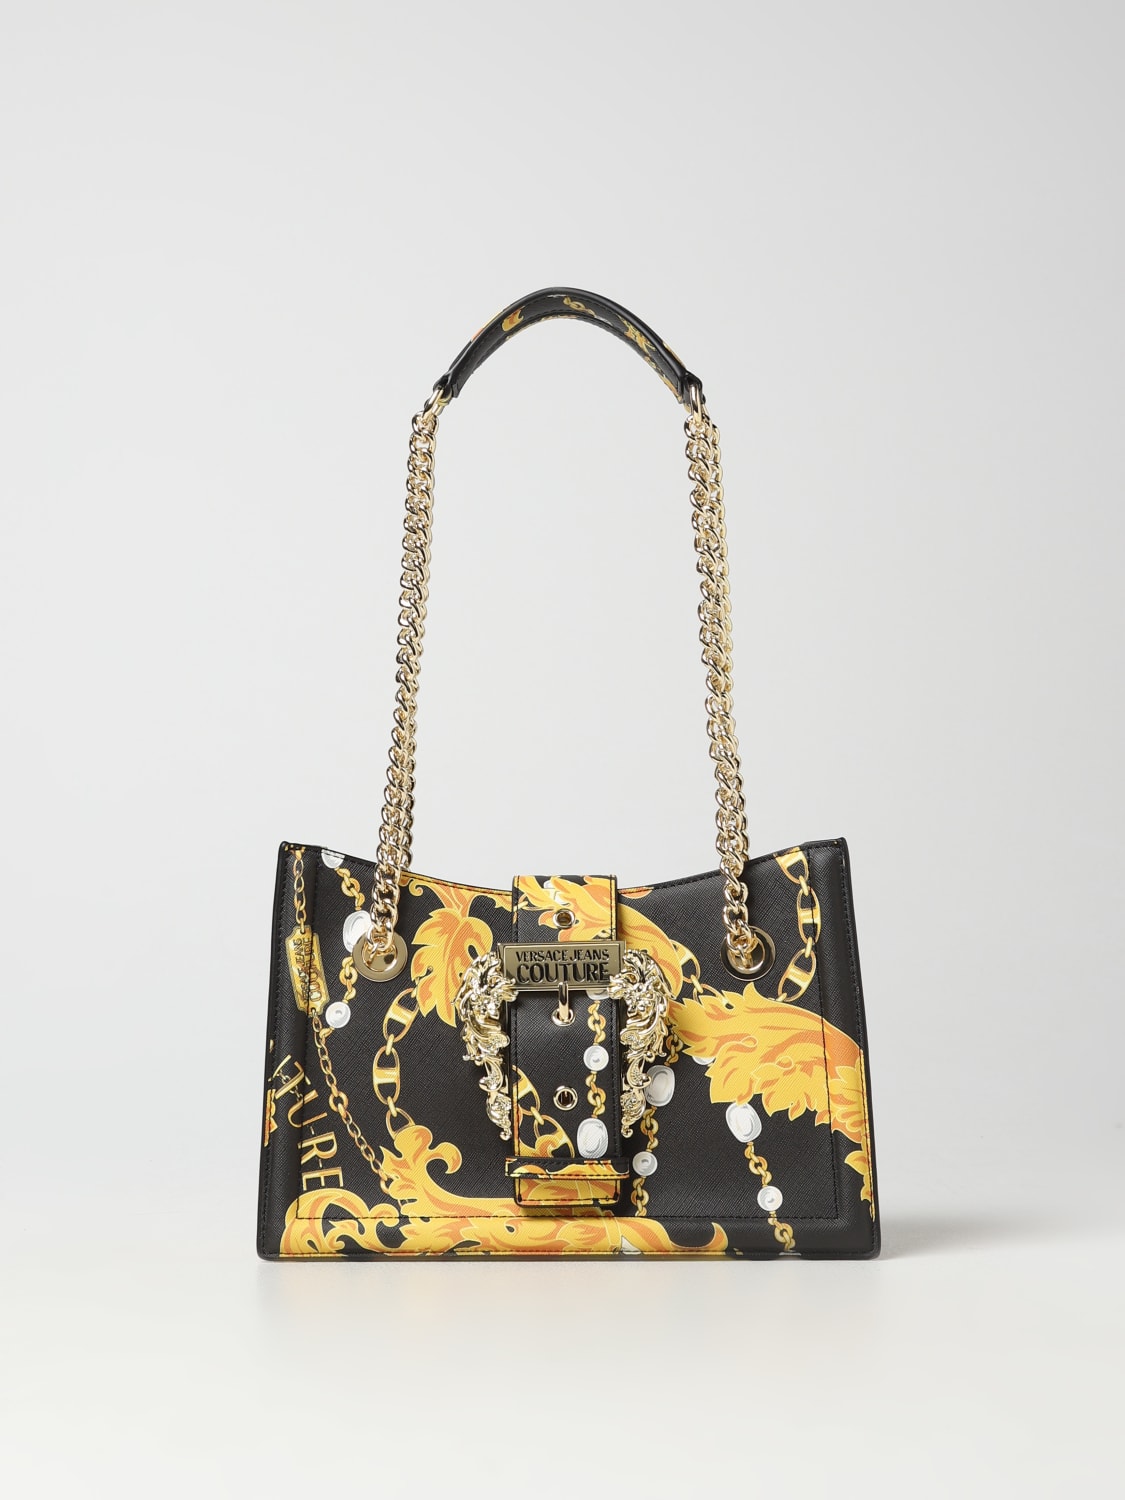 Buy Versace Jeans Couture Bags for Women Online